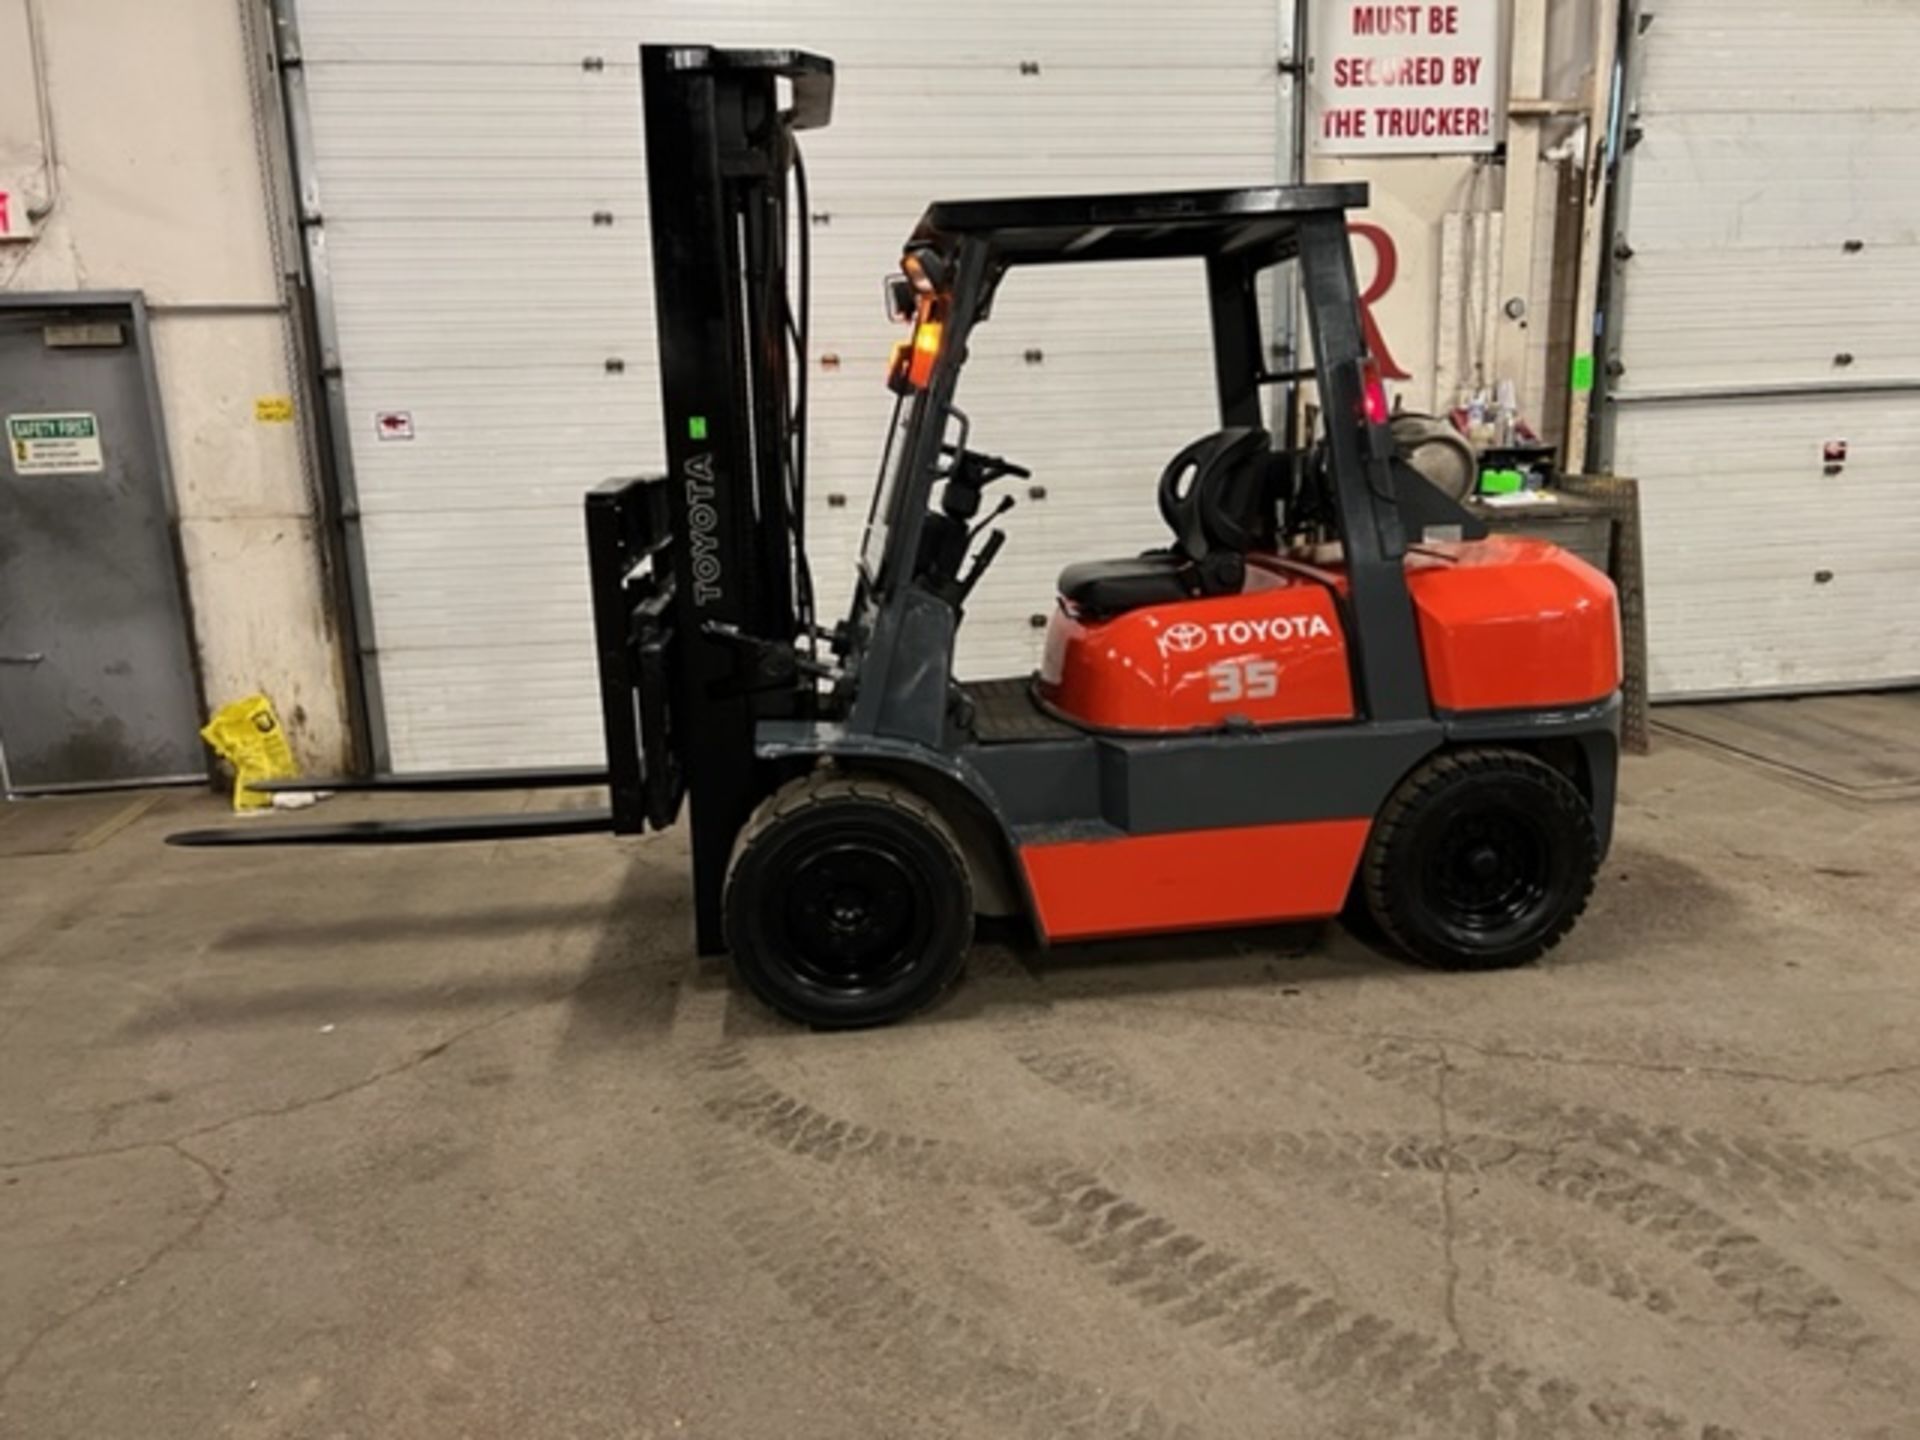 FREE CUSTOMS - MINT Toyota model 35 - 7,000lbs Capacity OUTDOOR Forklift LPG (propane) with